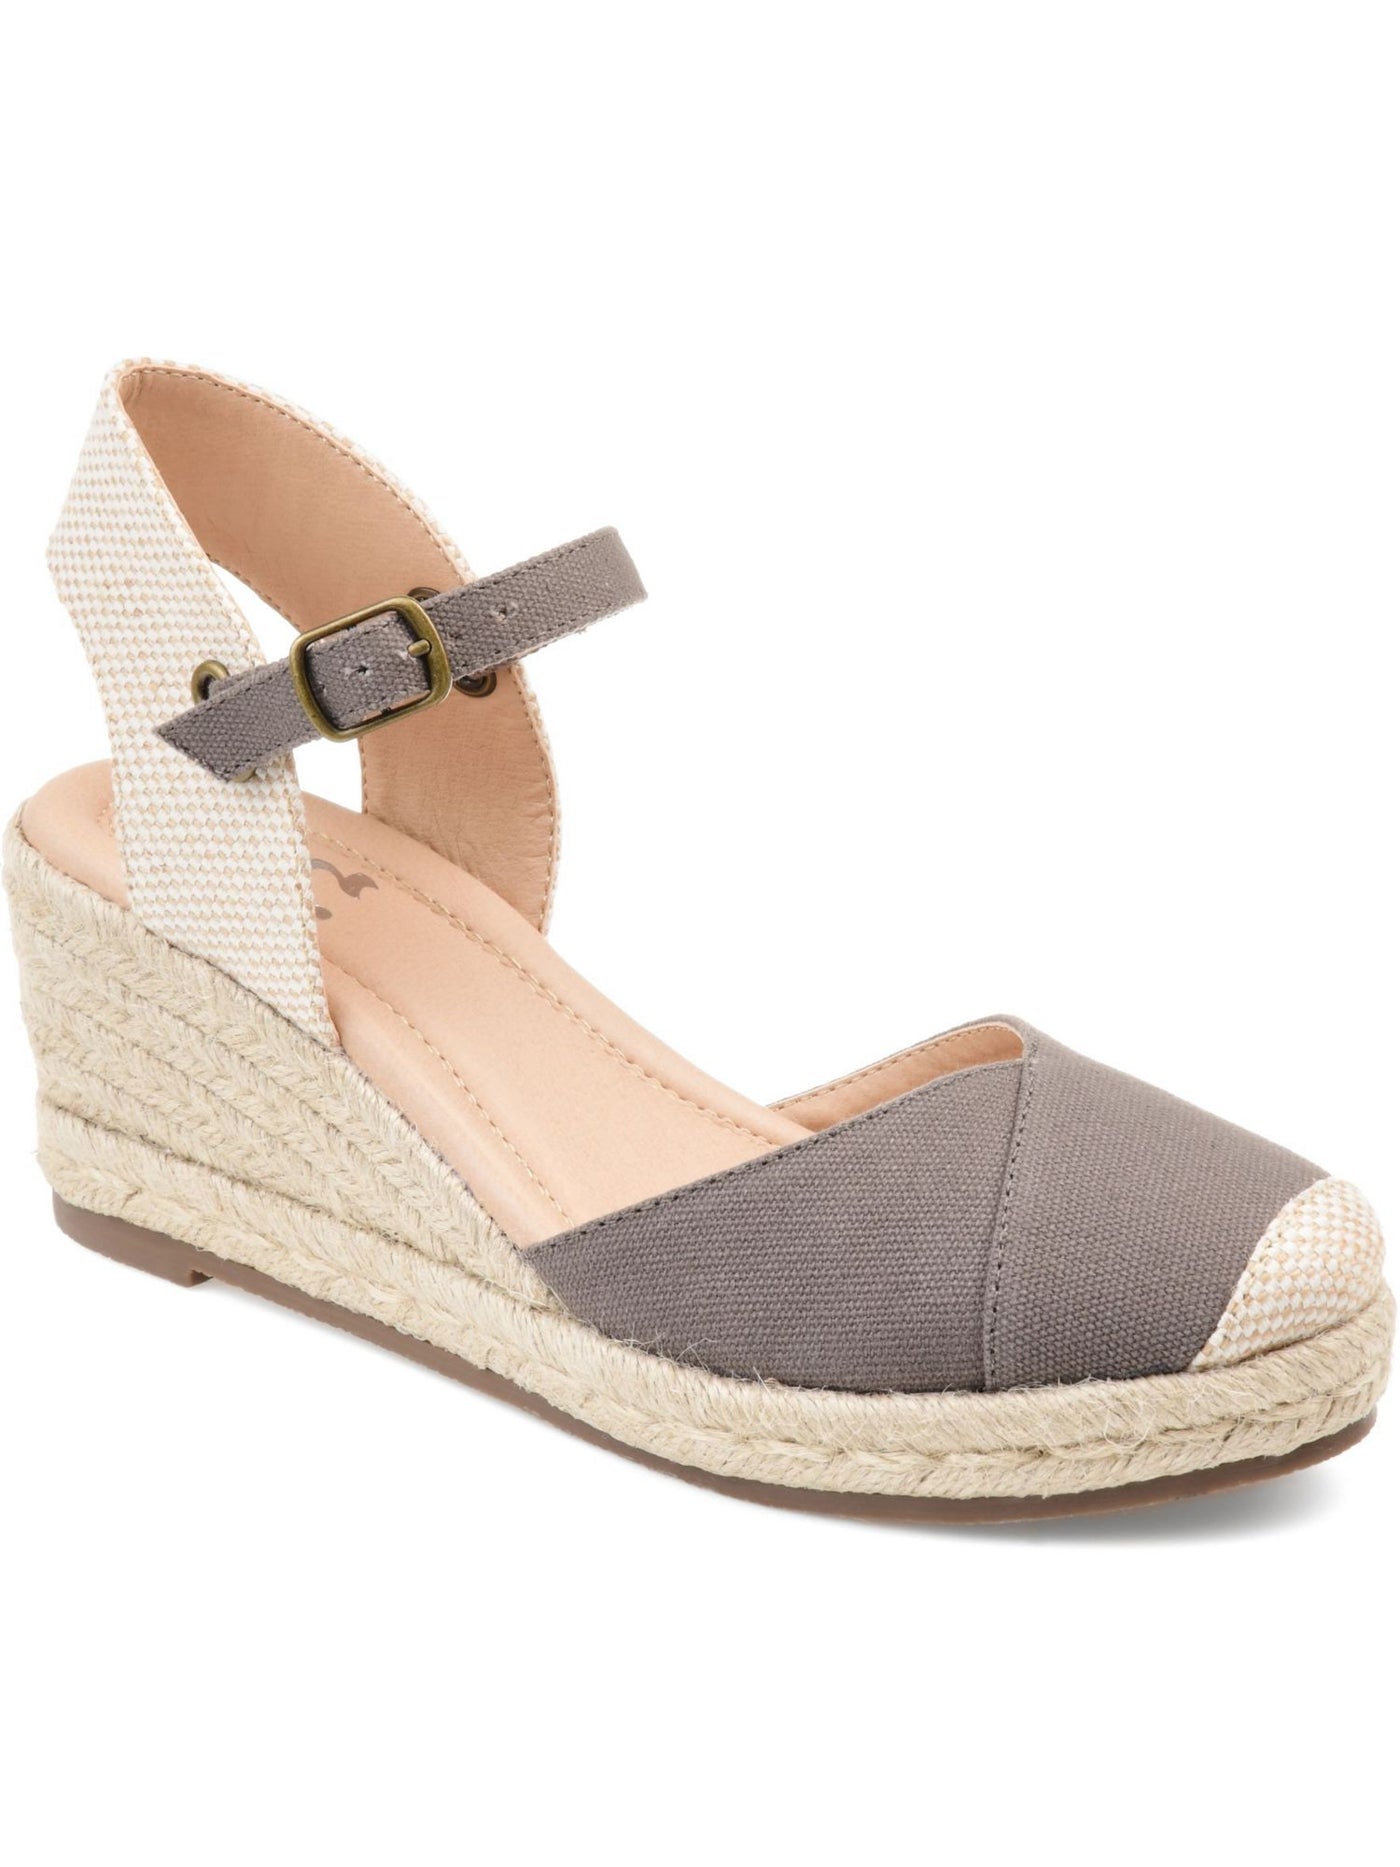 JOURNEE COLLECTION Womens Gray Toe Design Ankle Strap Padded Ashlyn Round Toe Wedge Buckle Espadrille Shoes 8.5